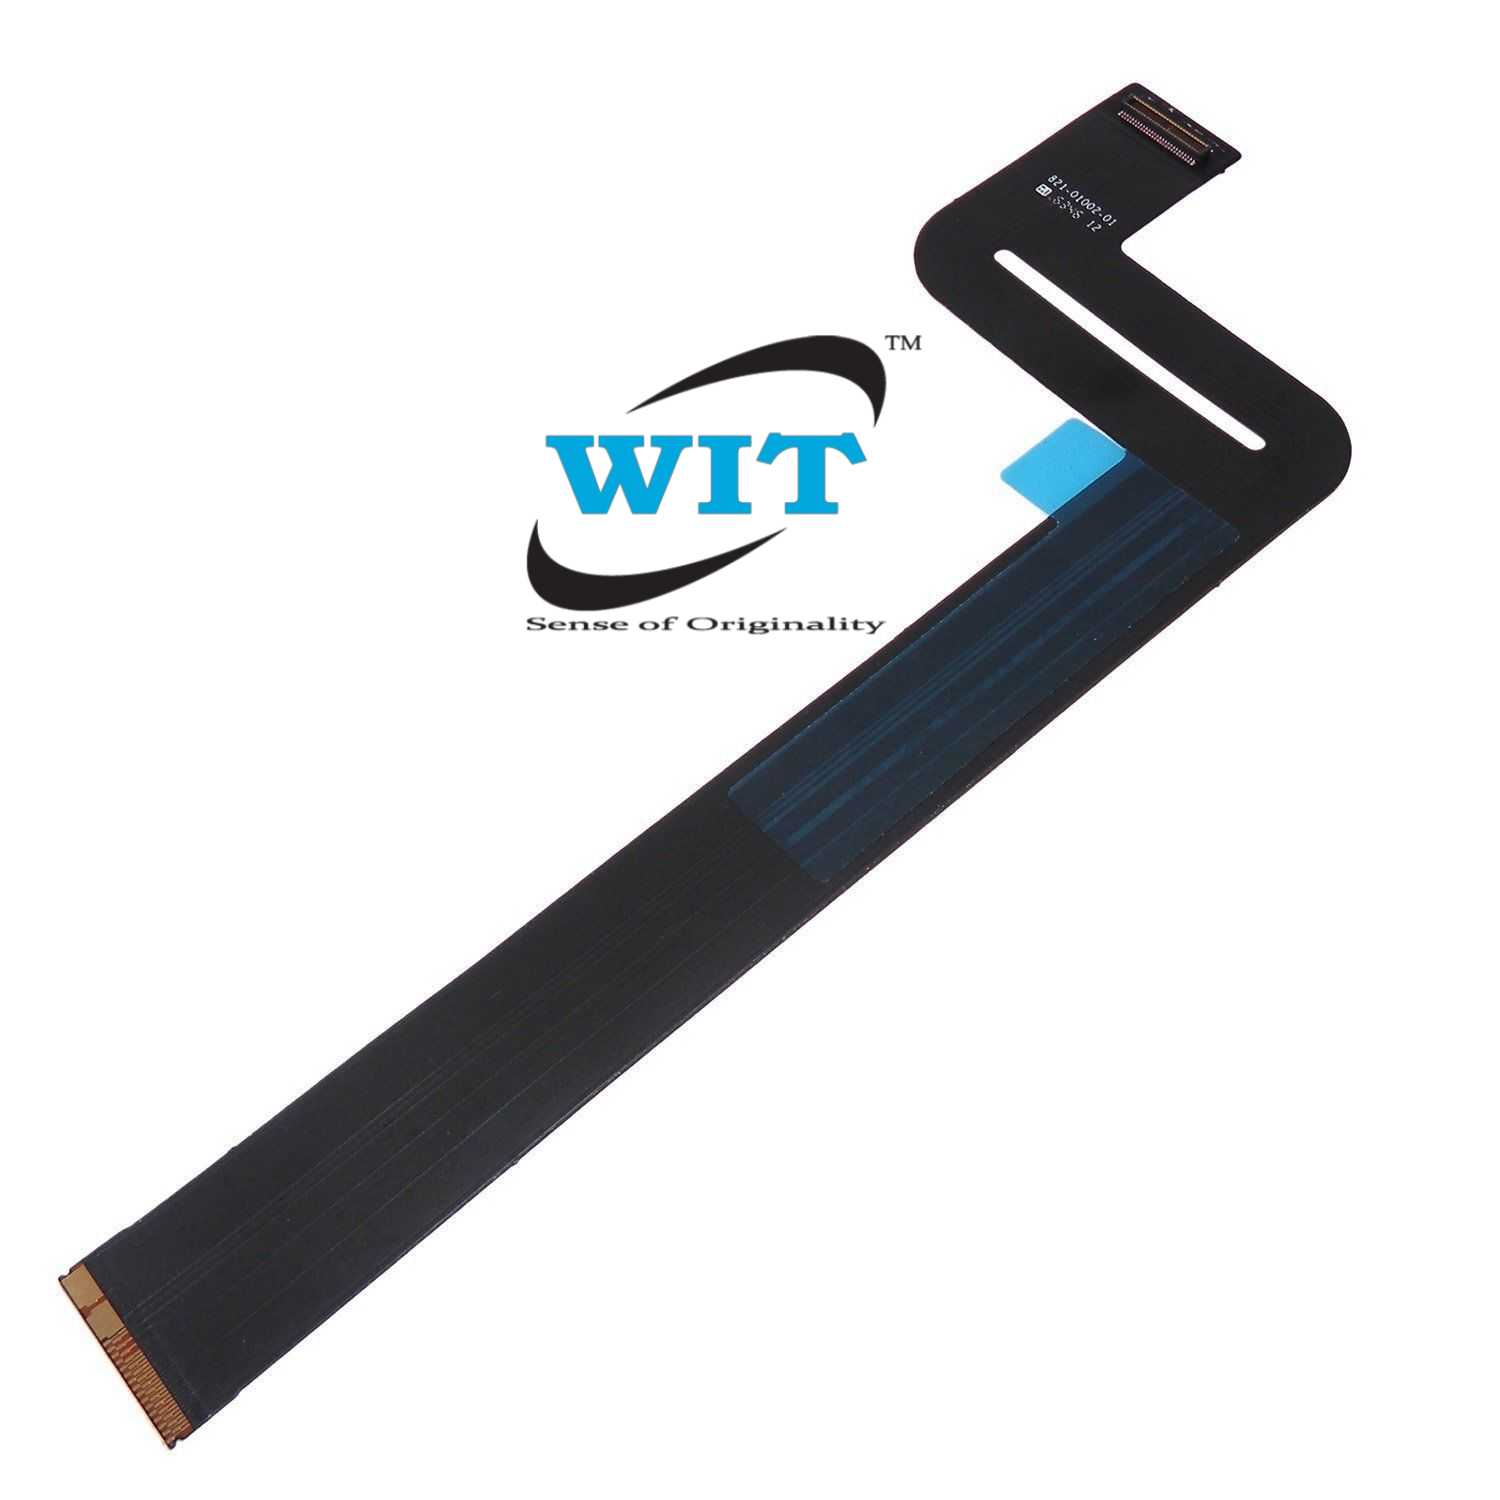 Padarsey Trackpad Touchpad Ribbon Flex Cable Compatible for MacBook Pro Retina 13 A1502 2015 Series Compatible with Part# 810-00149-A 810-00149-04